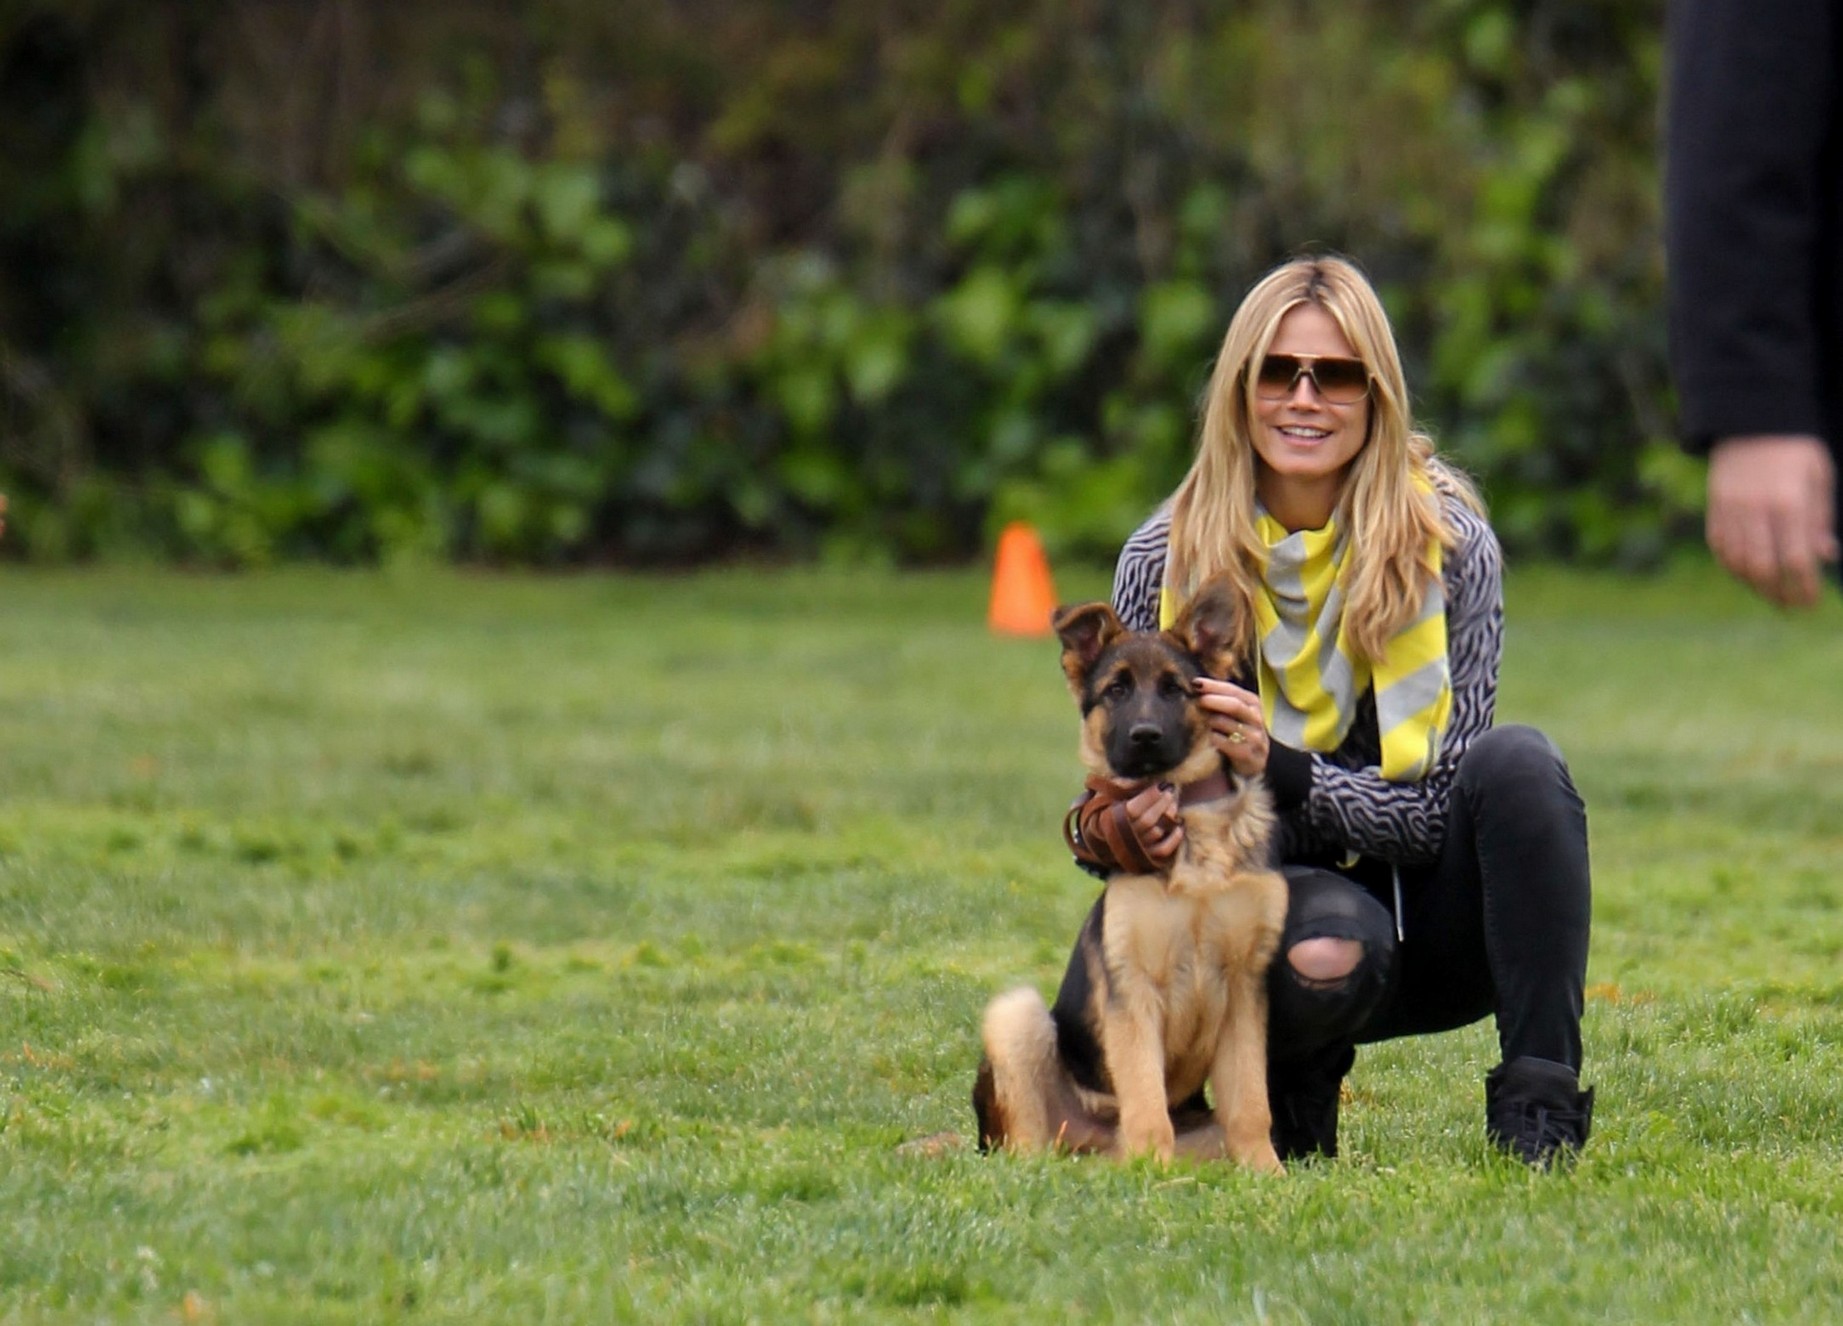 MARCH 30: Taking her kids and dogs to a park - Heidi Klum Photo ...